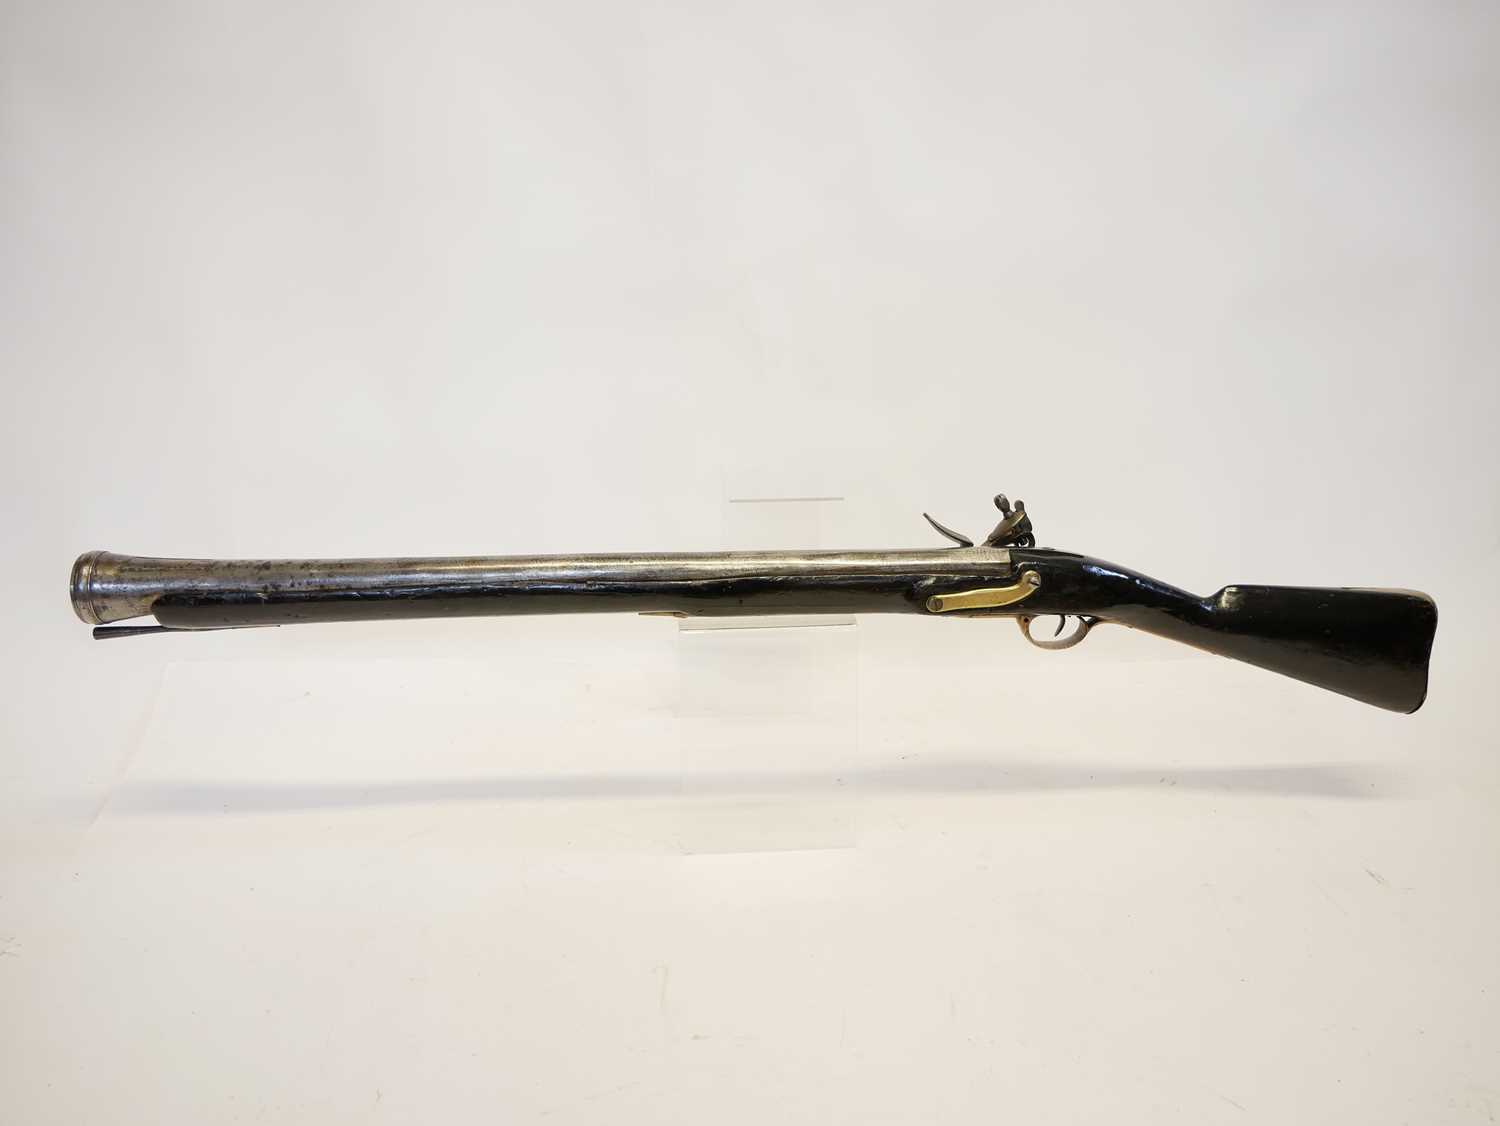 Flintlock musketoon with possible Tipu Sultan connection. - Image 14 of 14